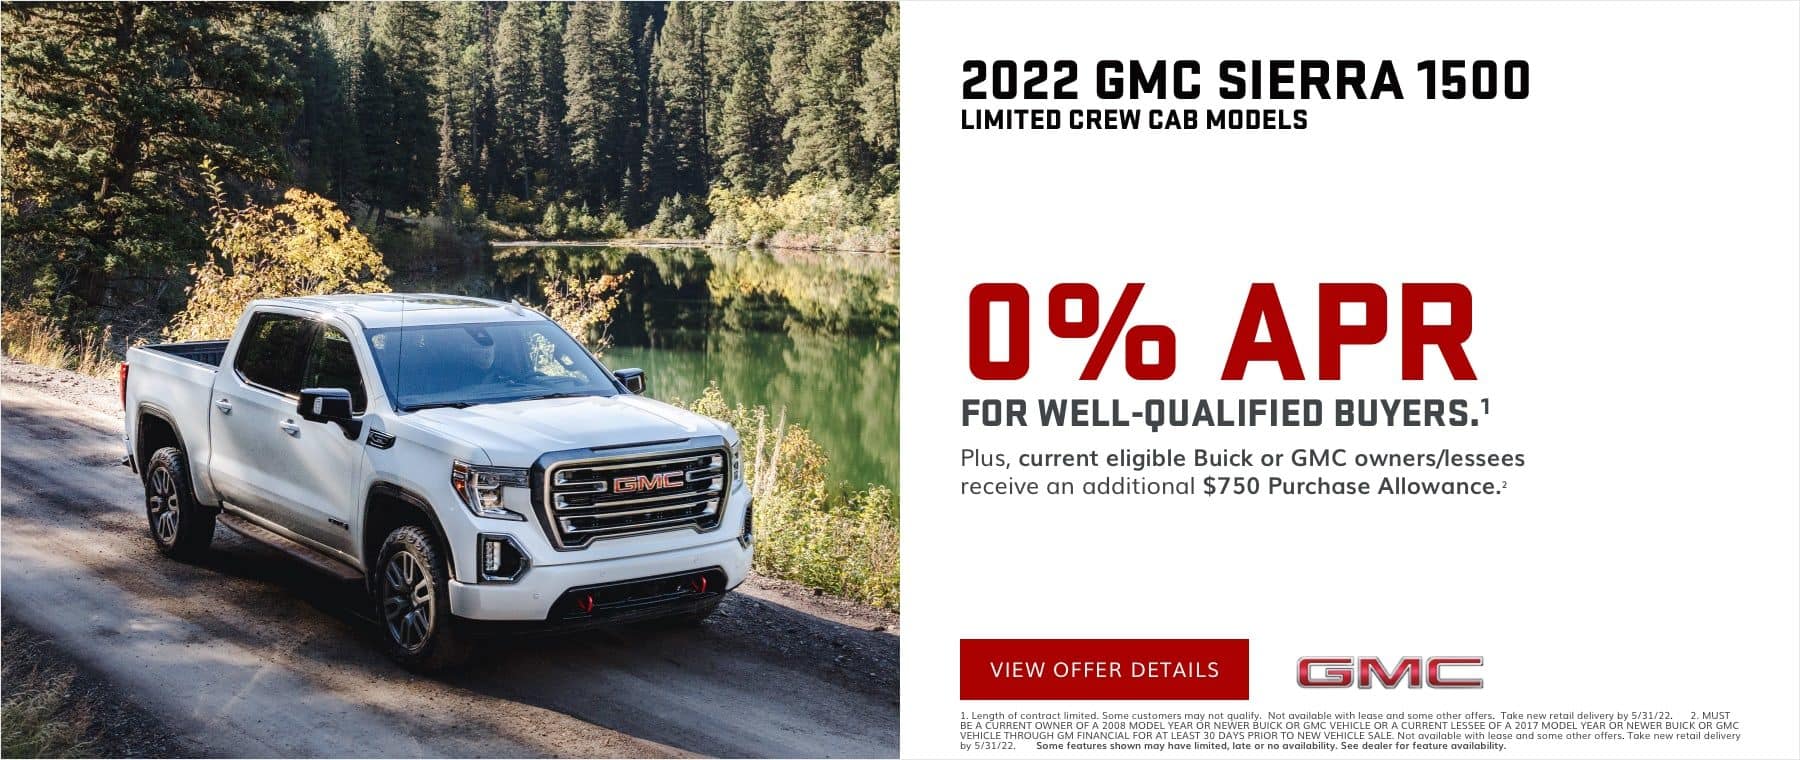 0% APR for well-qualified buyers.1 Plus, current eligible Buick or GMC owners/lessees receive an additional $750 Purchase Allowance.2